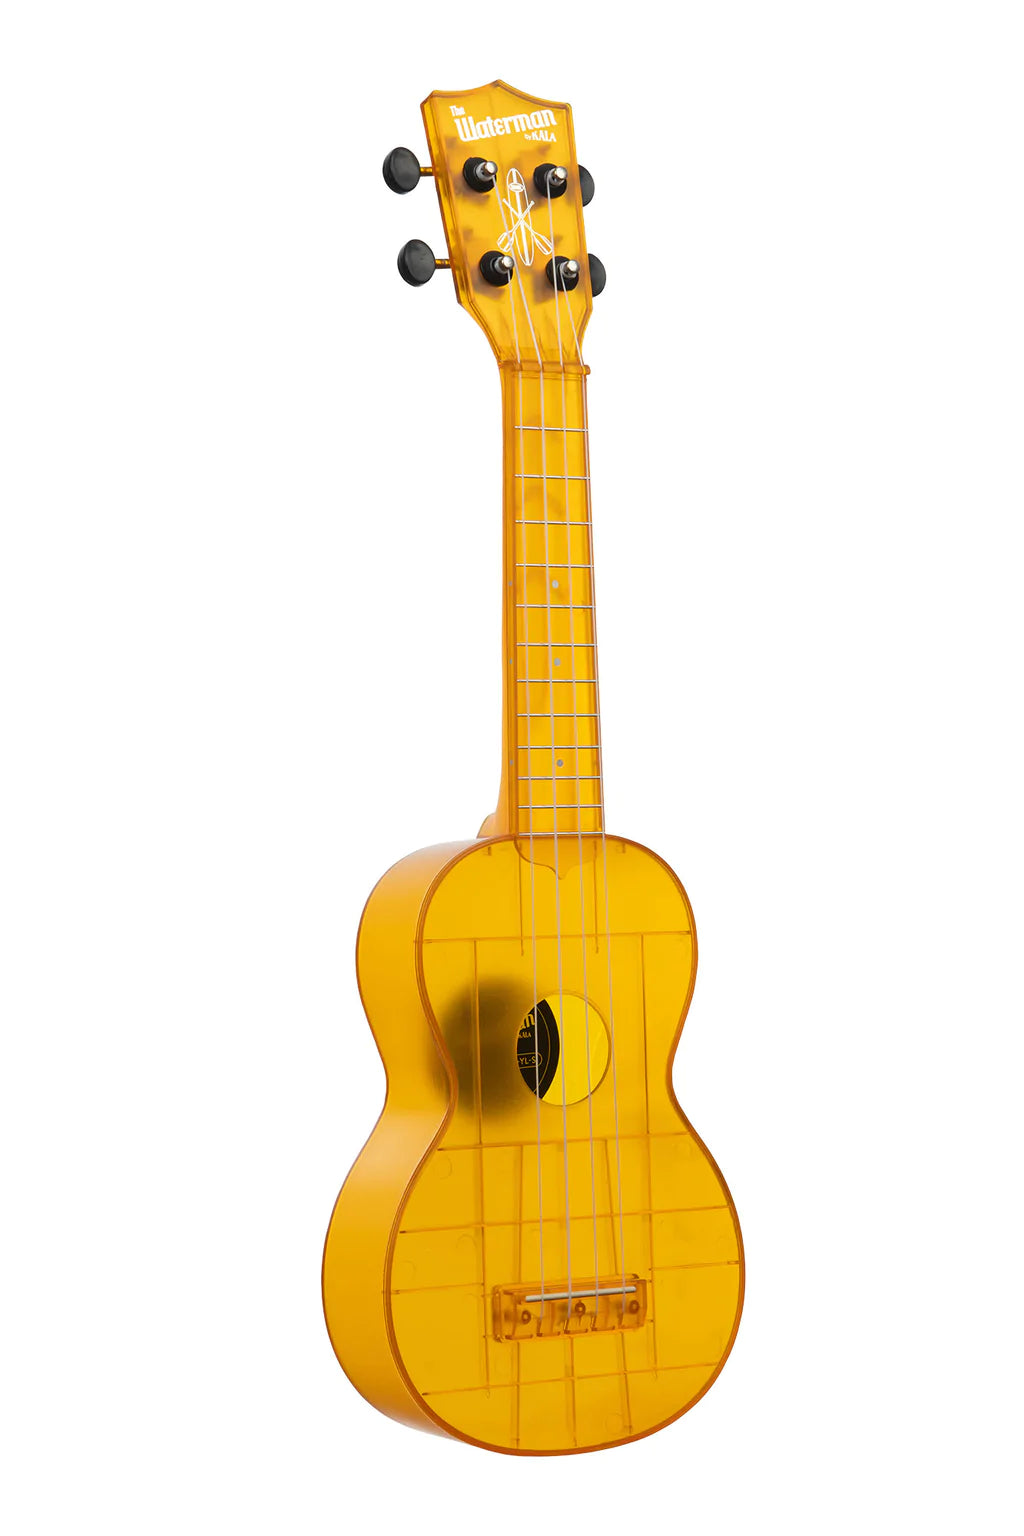 Transparent Amber Yellow: Learn to Play The Waterman Ukulele by Kala